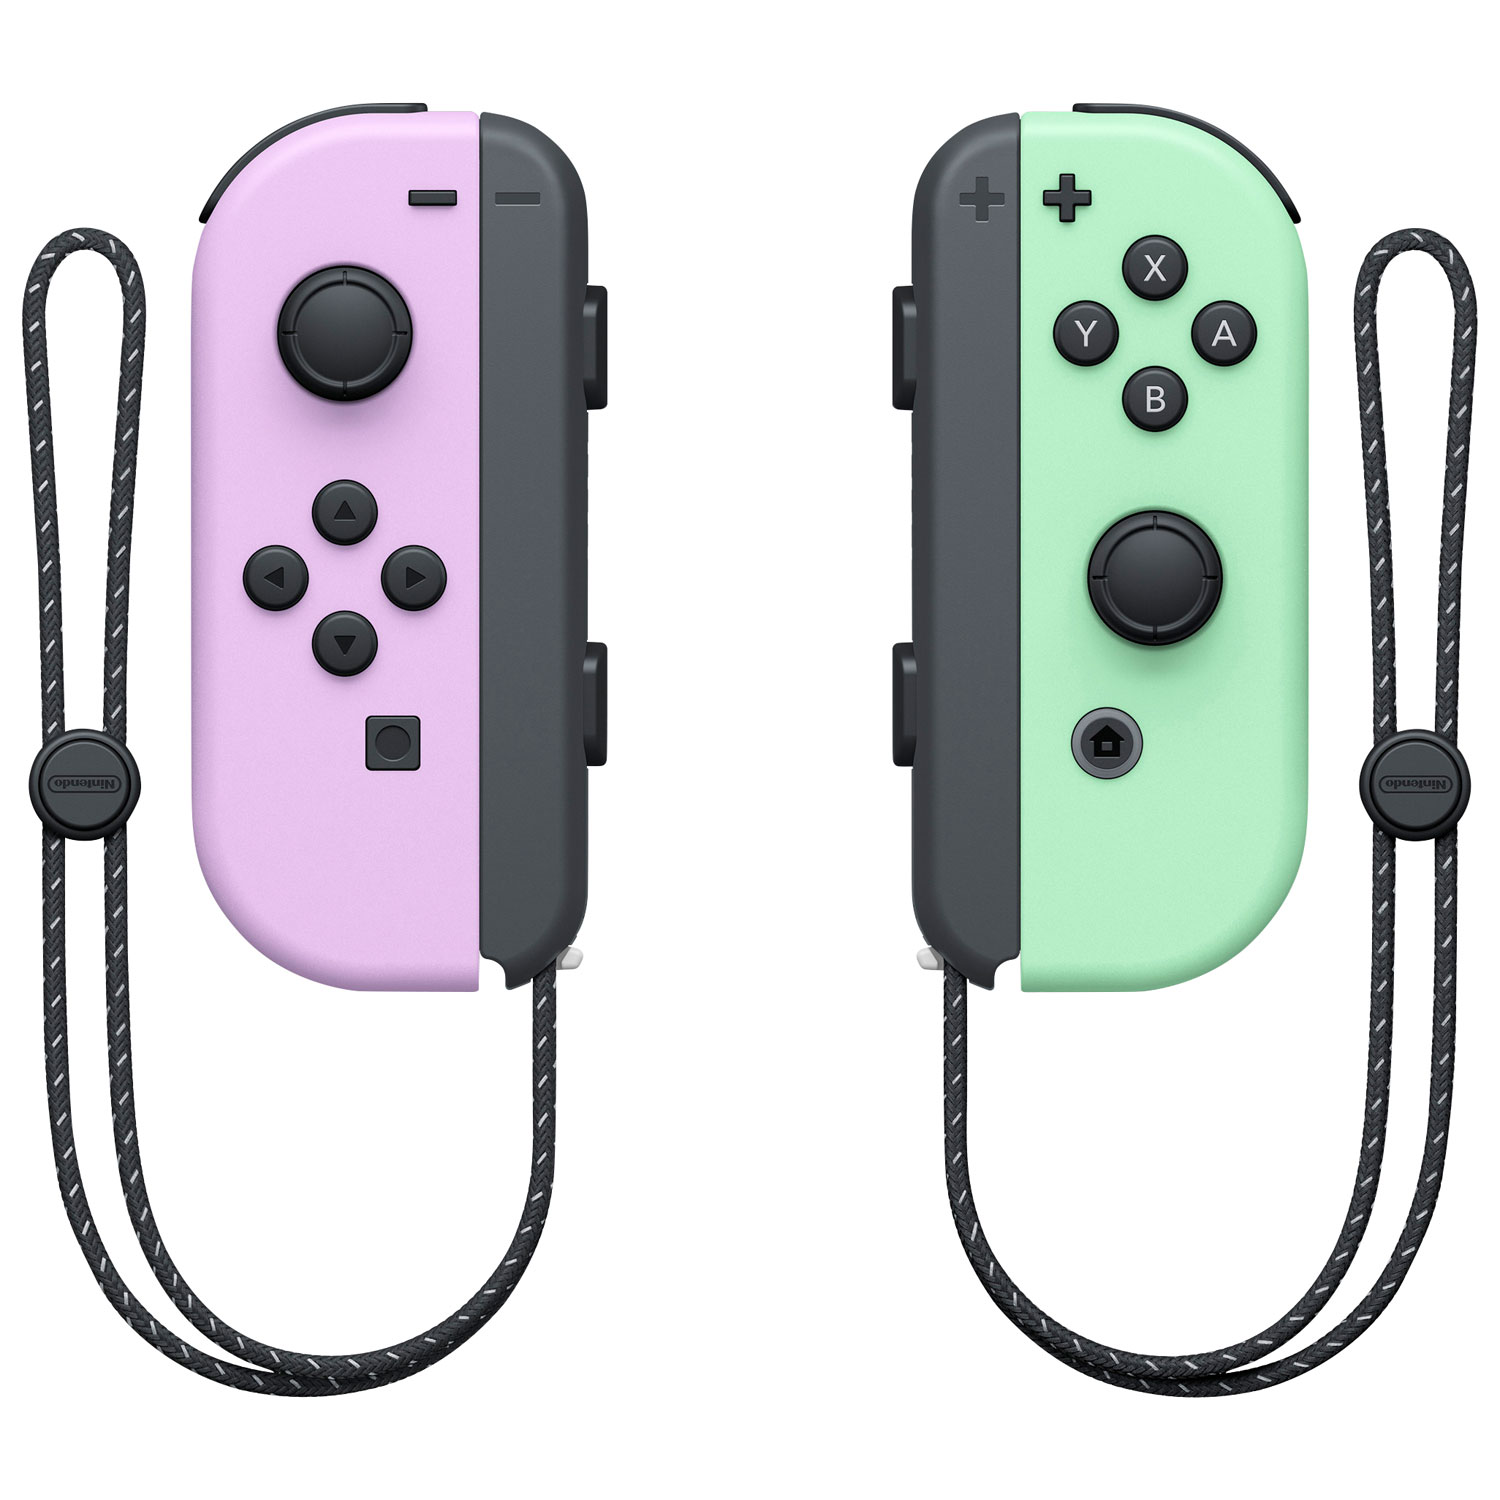 Nintendo Switch Left and Right Joy-Con Controllers - Pastel Purple 